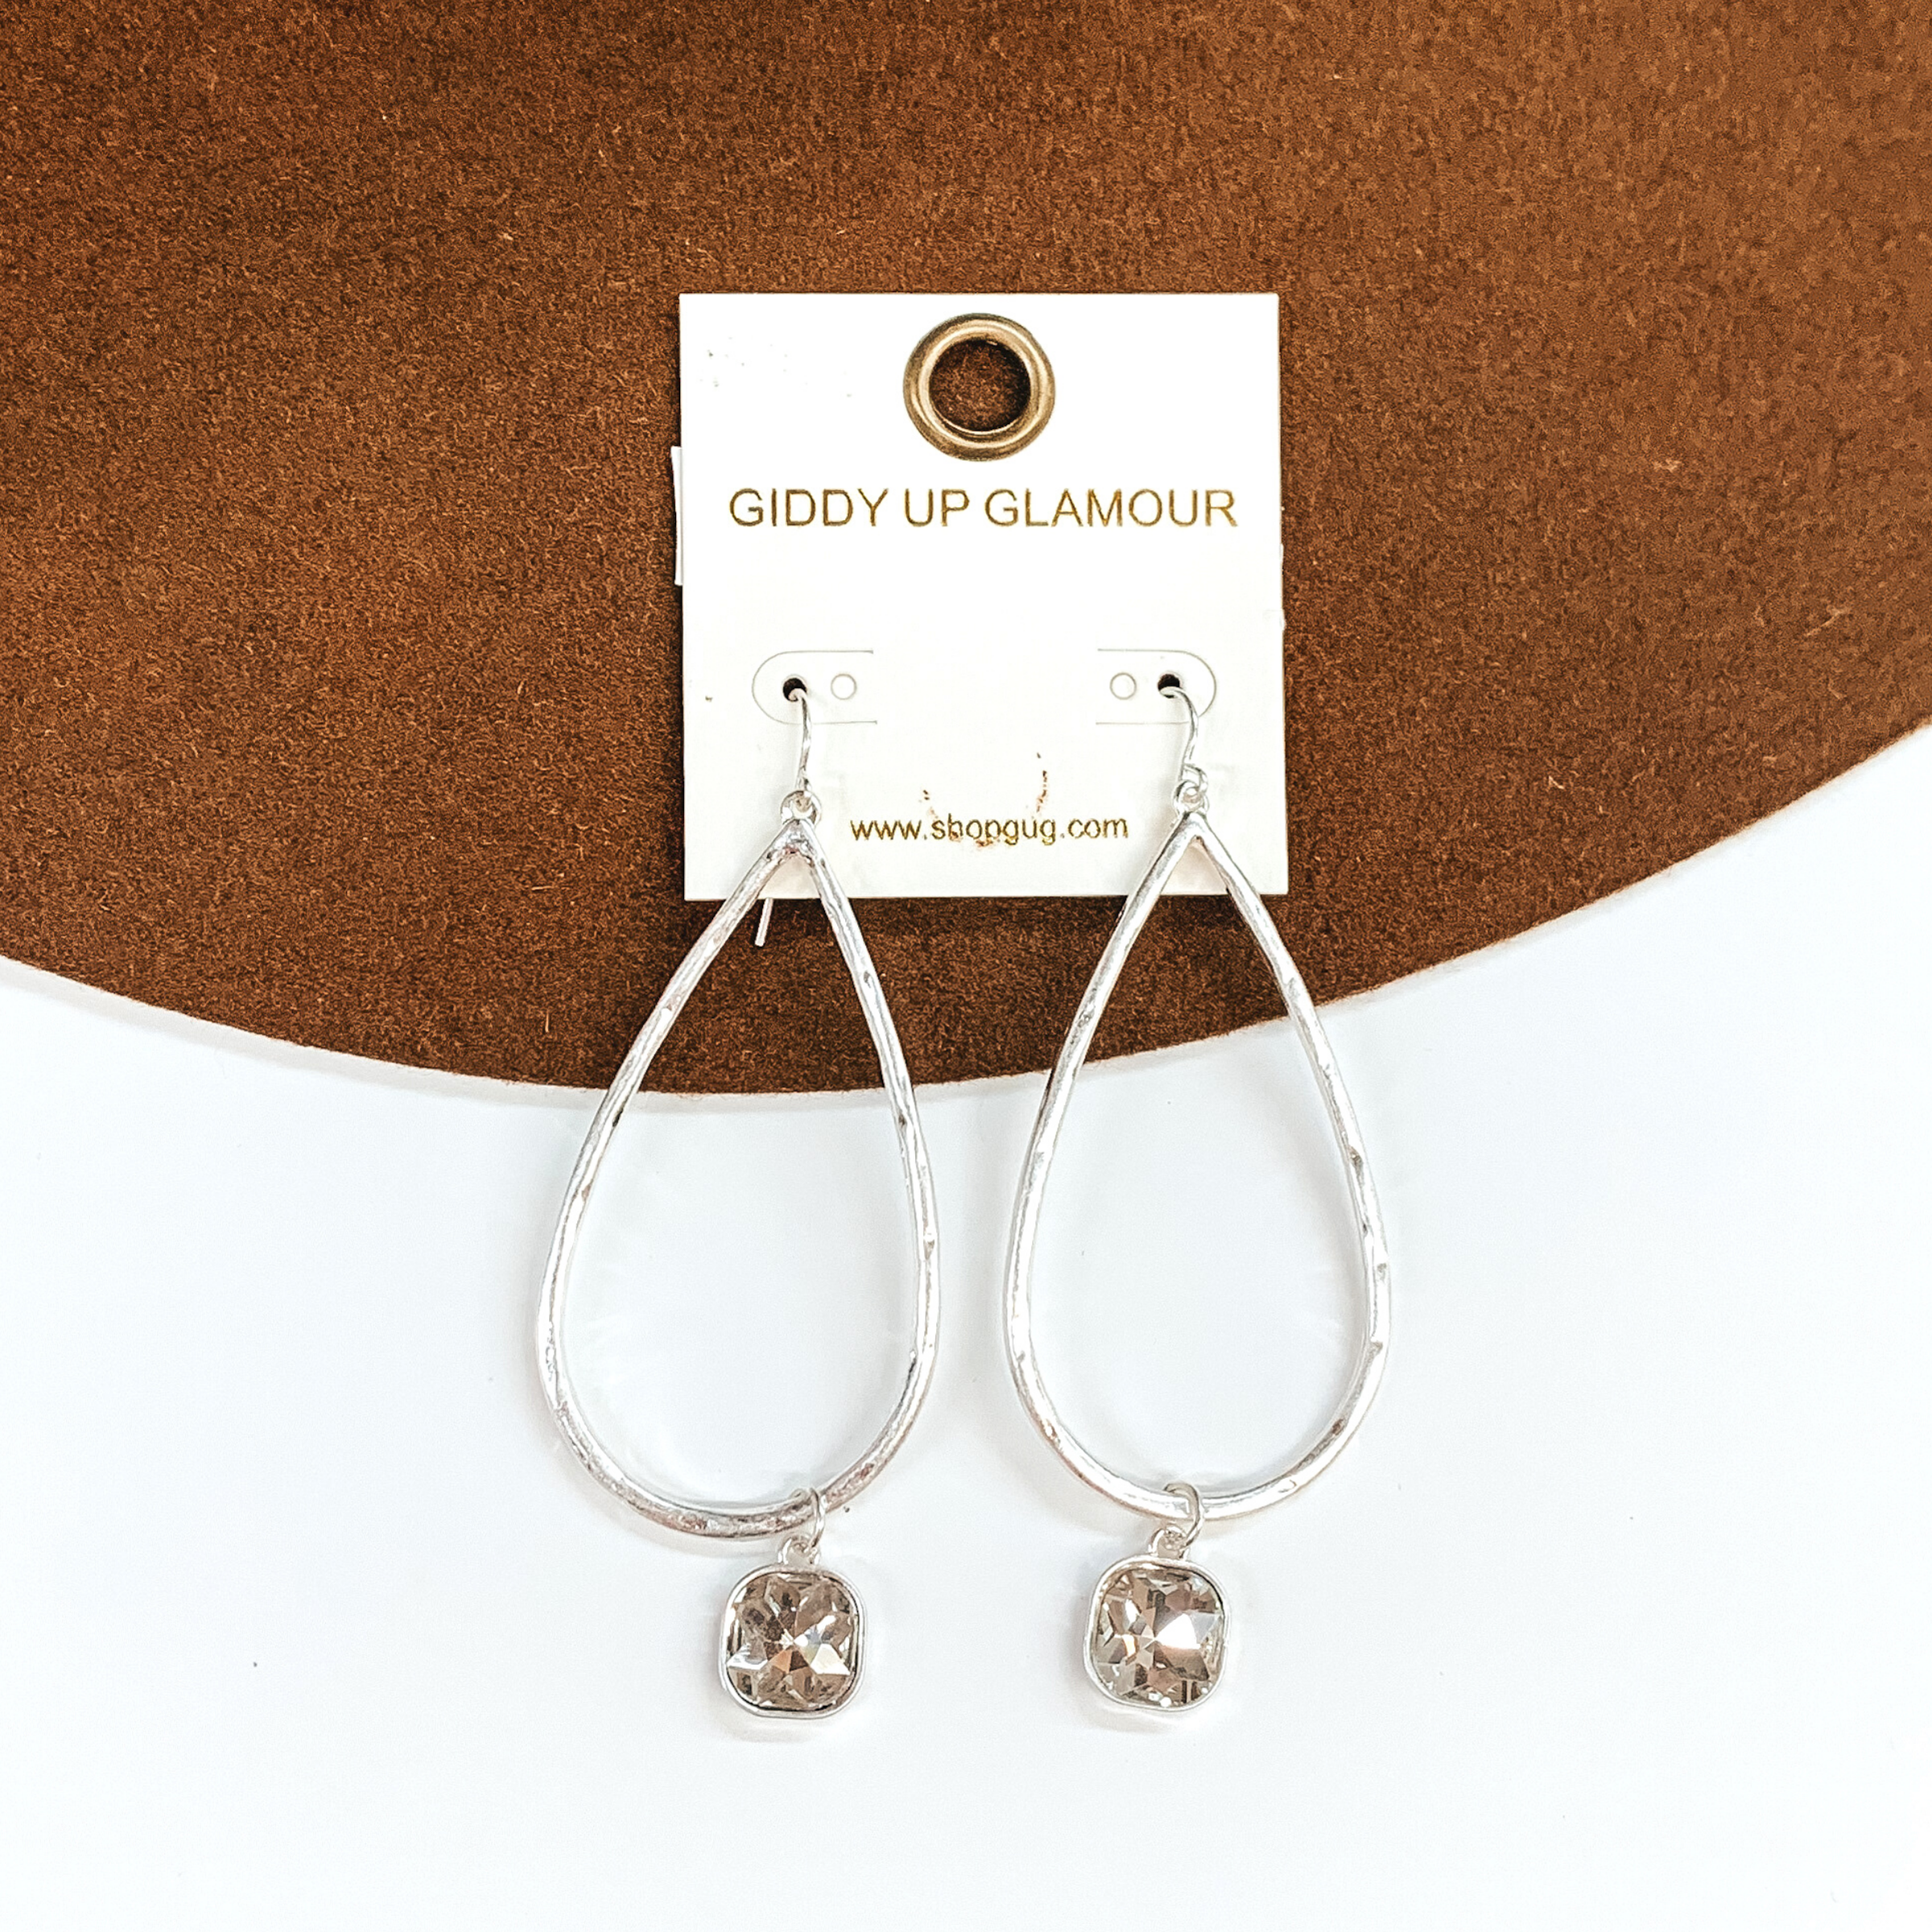 Silver teardrop hammered earrings with a hanging cushion cut clear crystal. These earrings are pictured on a white and brown background.